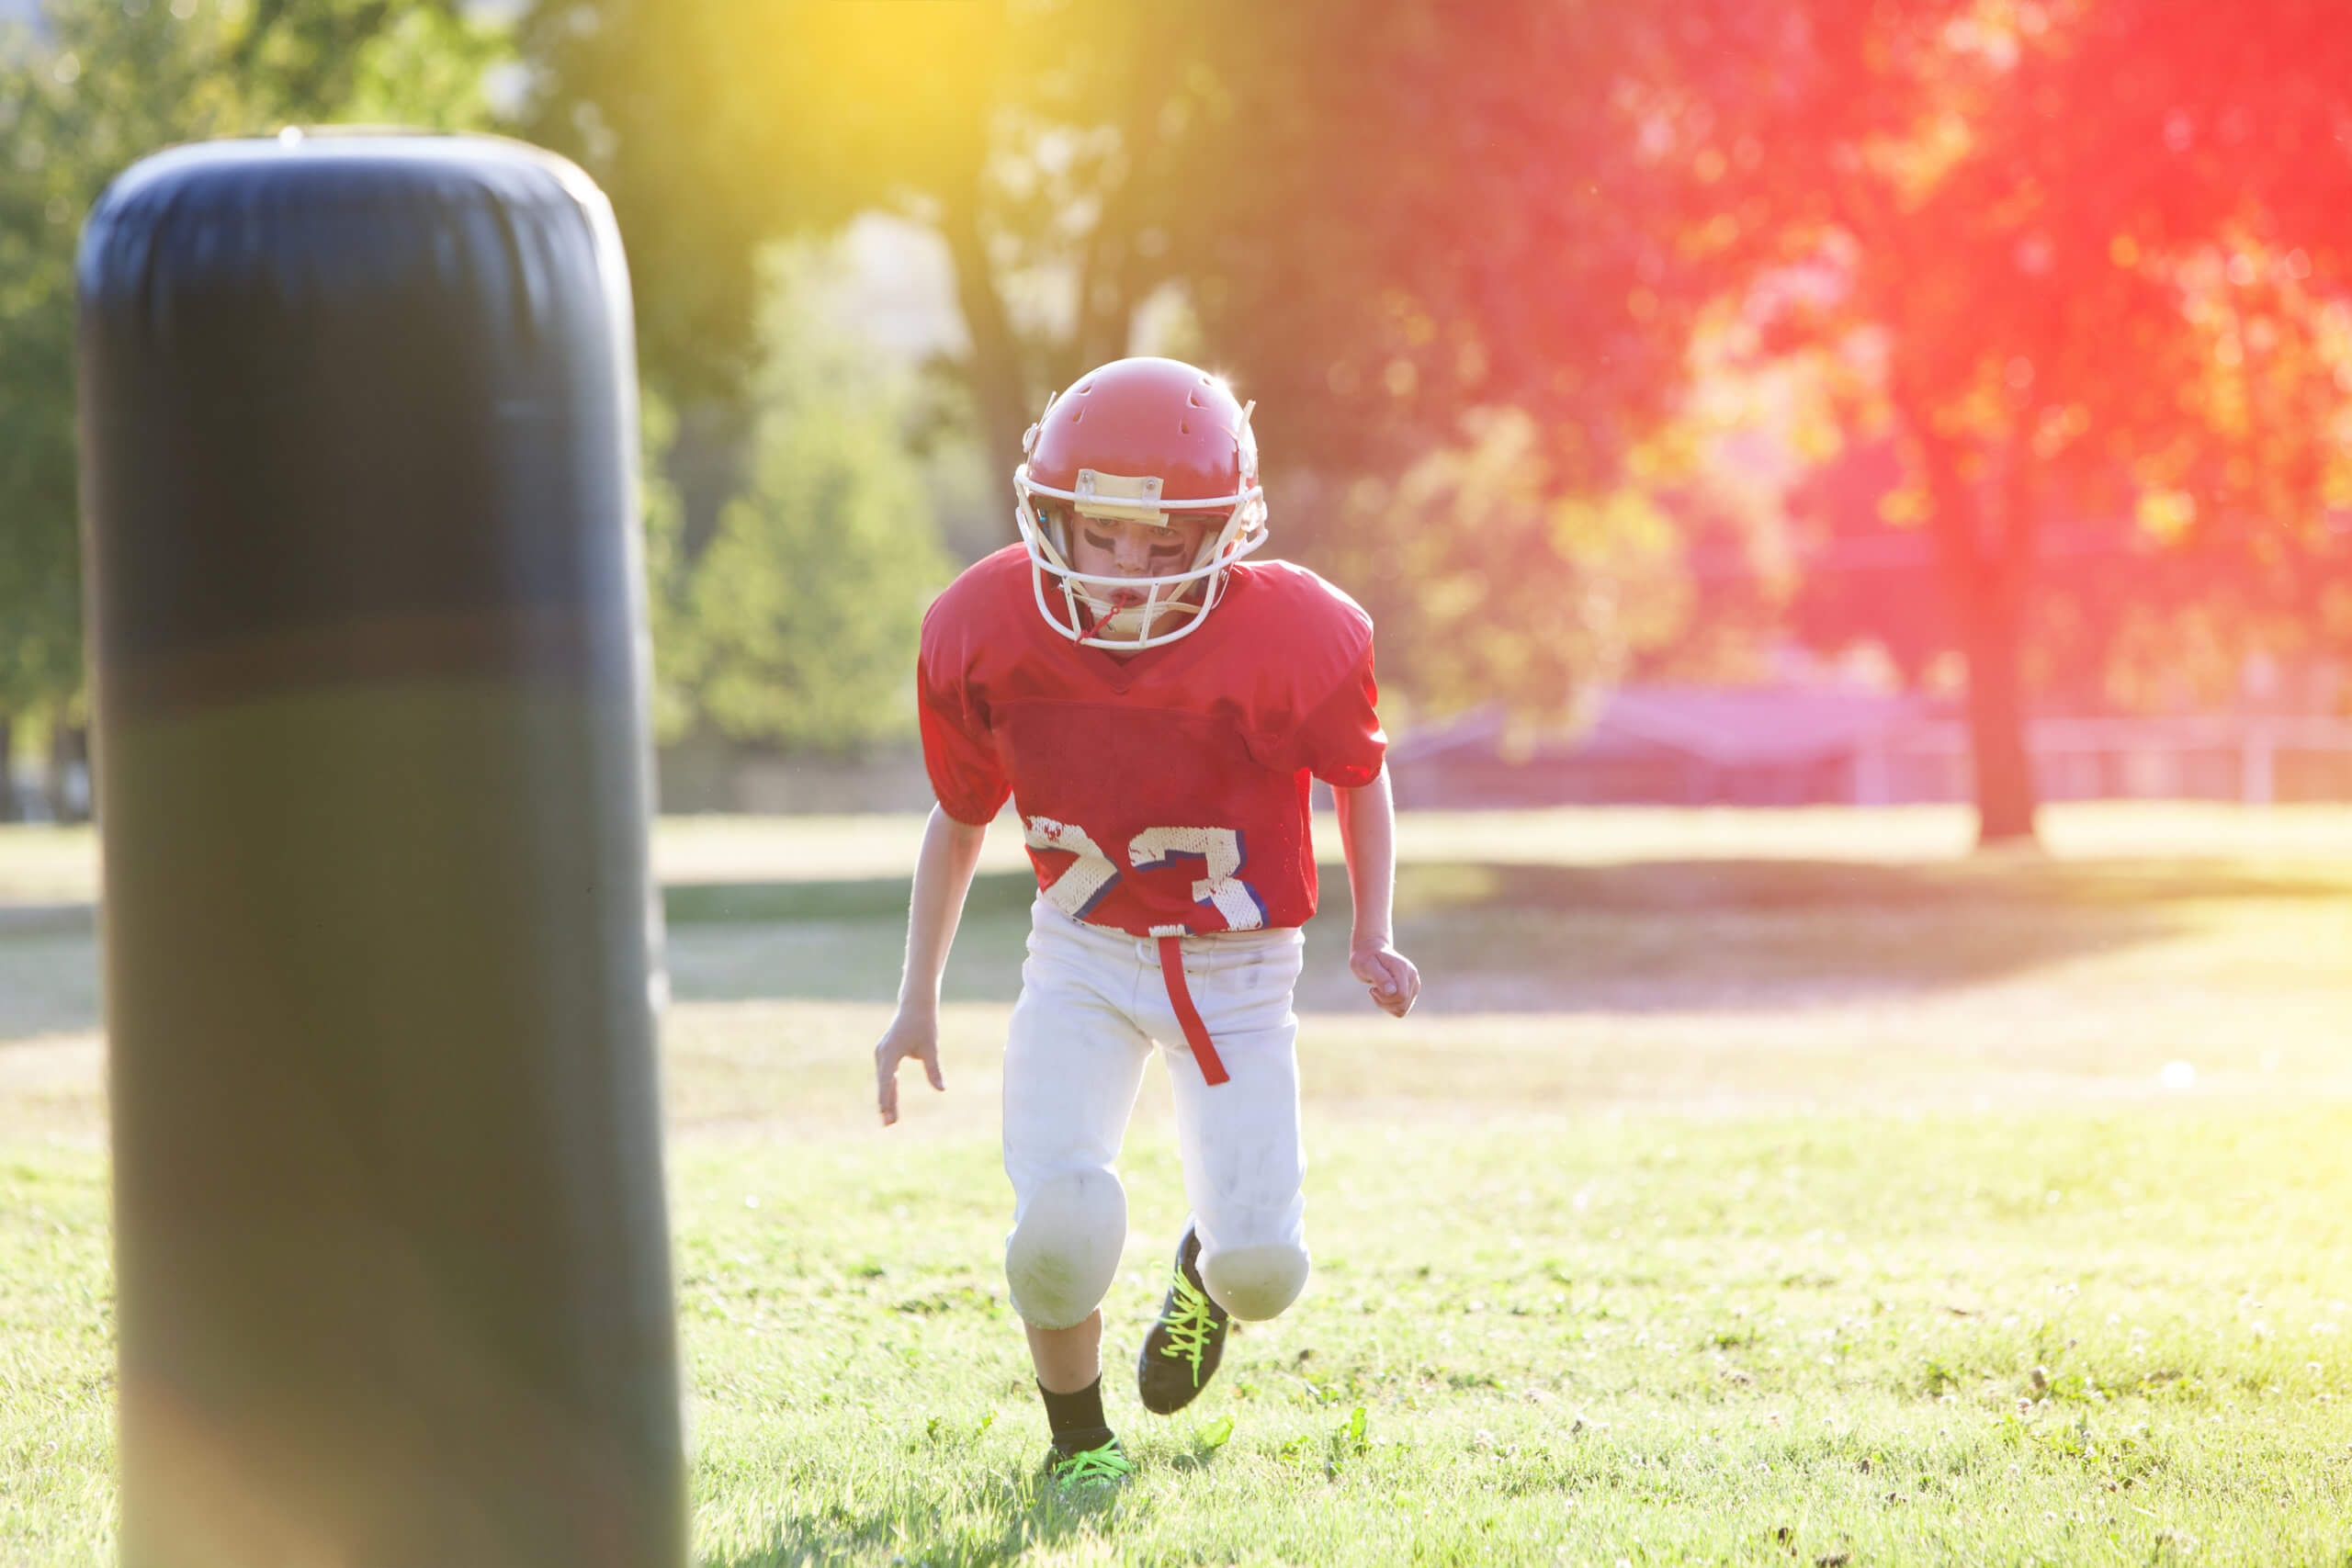 Young child in red-and-white football uniform and helmet runs on the green grass playing field toward tackling dummy.